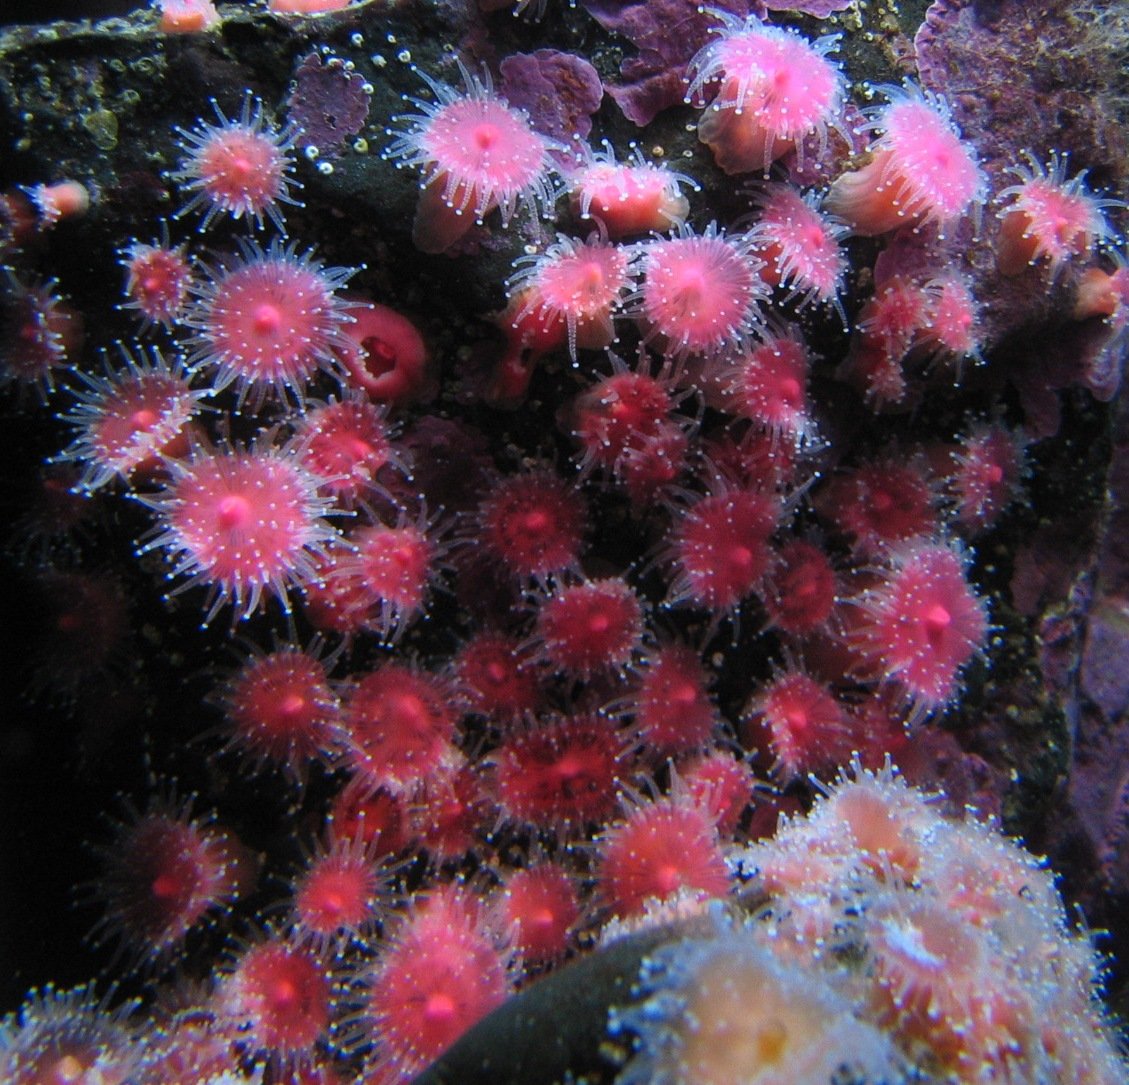 pink sea fans are growing in the deep ocean